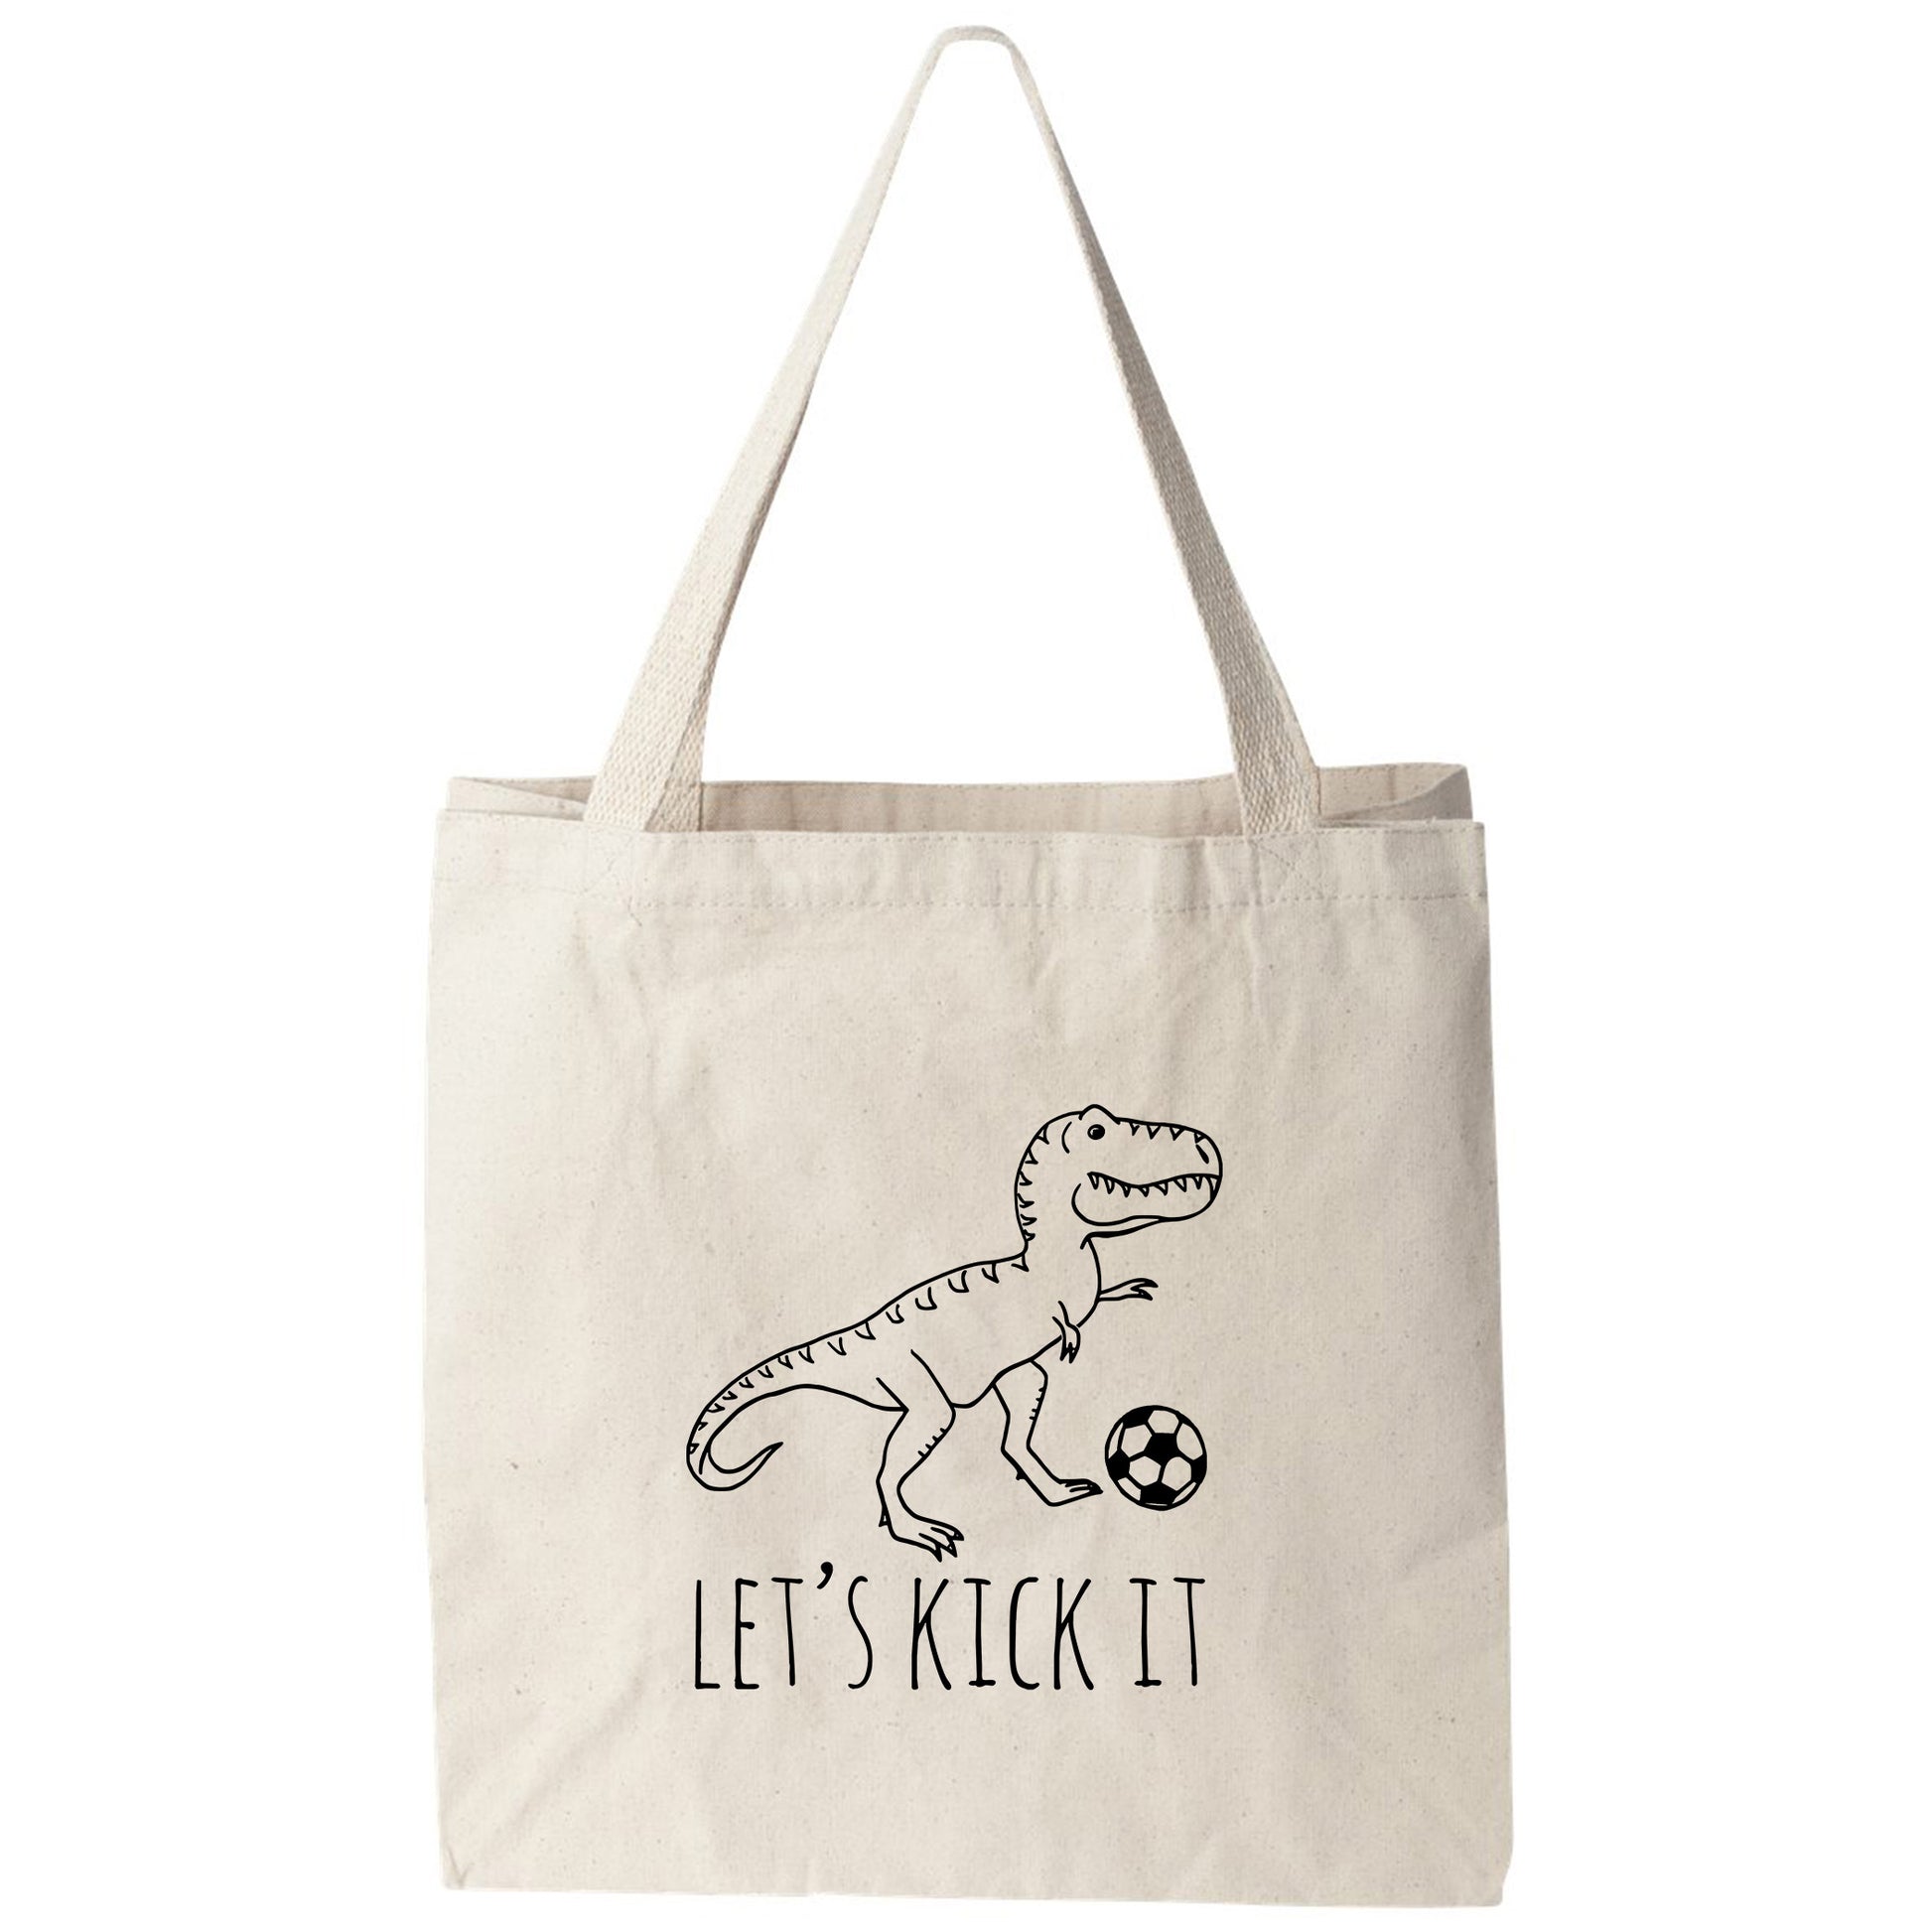 a tote bag with a drawing of a dinosaur on it